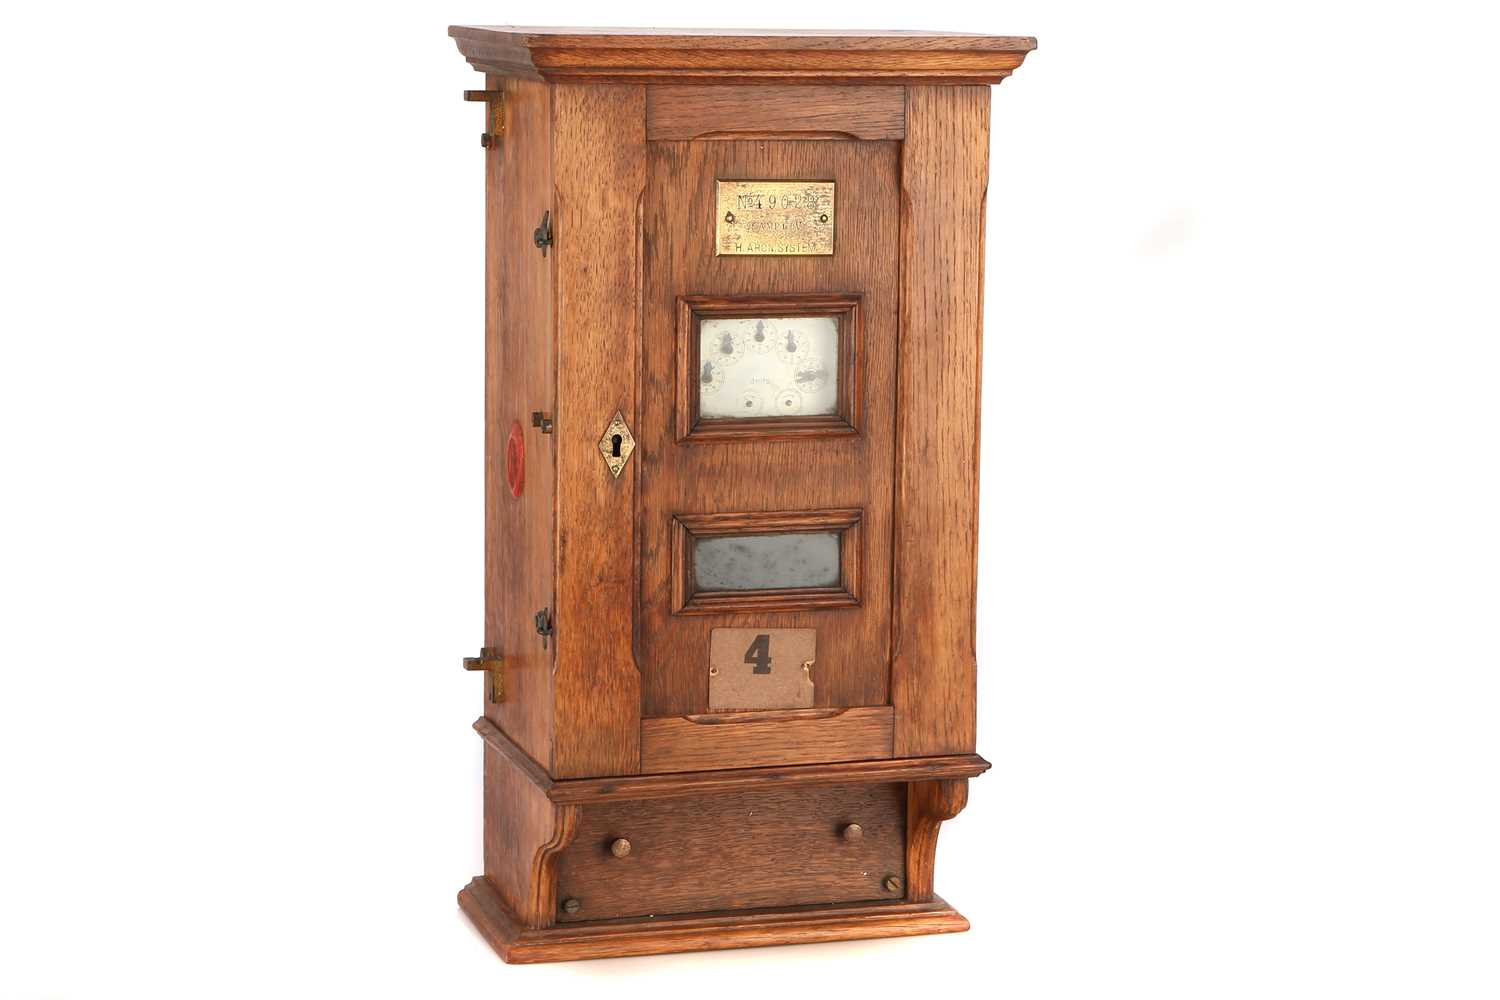 Lot 61 - An Early Aron Electricity Meter